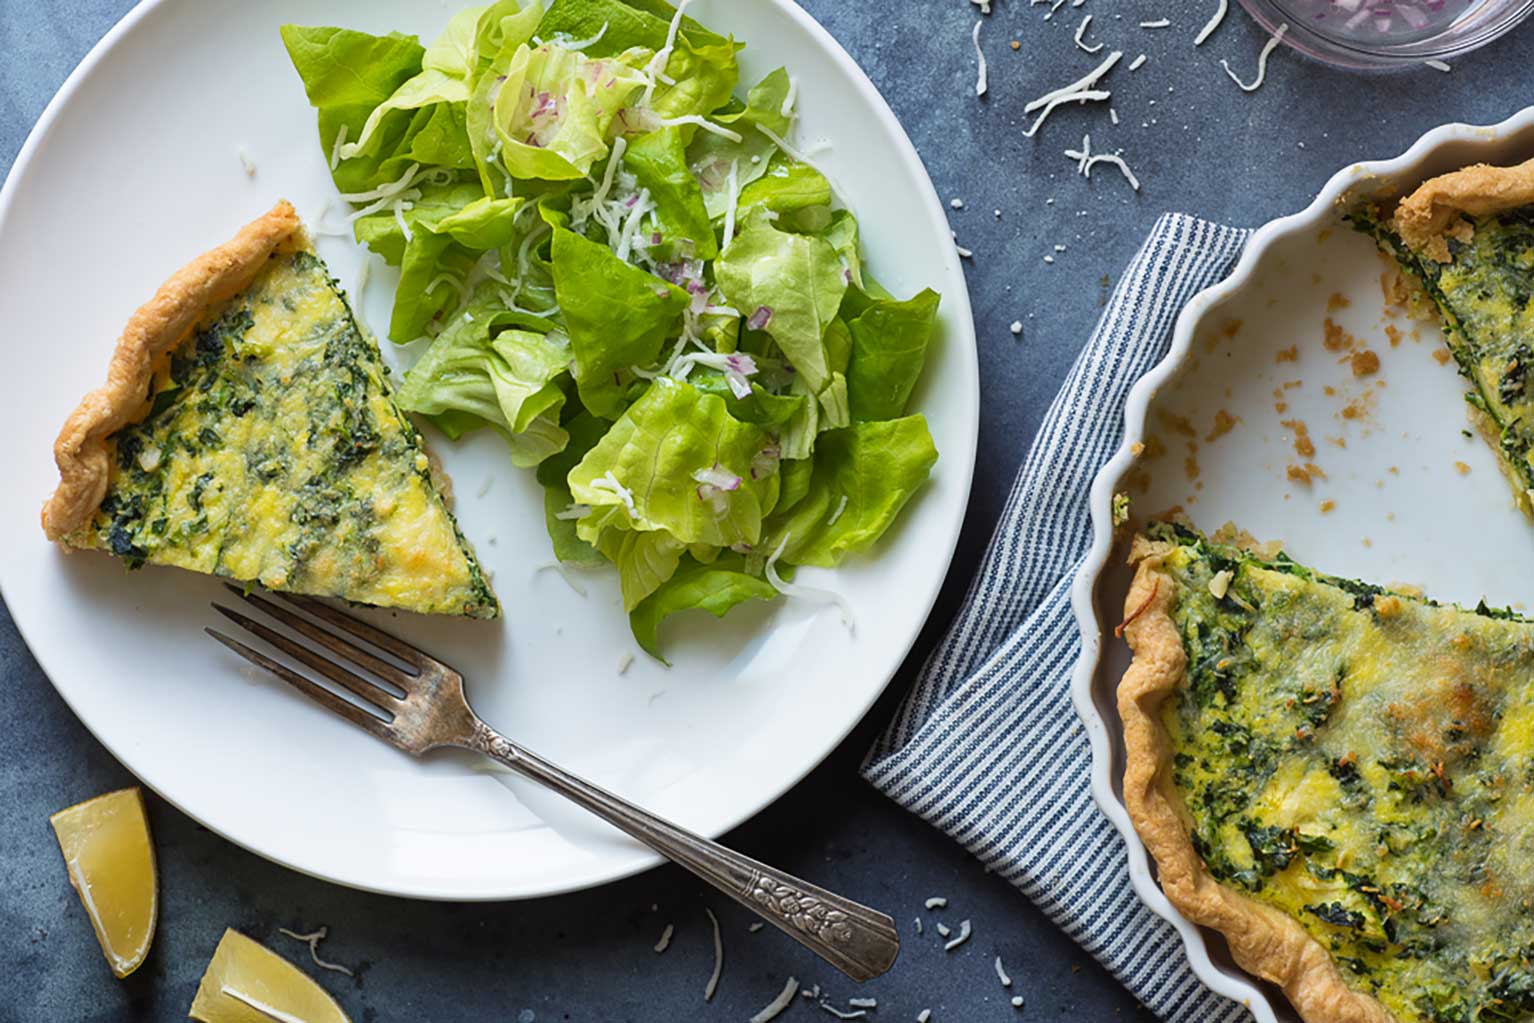 Zucchini Parmesan quiche with side salad on plate with fork